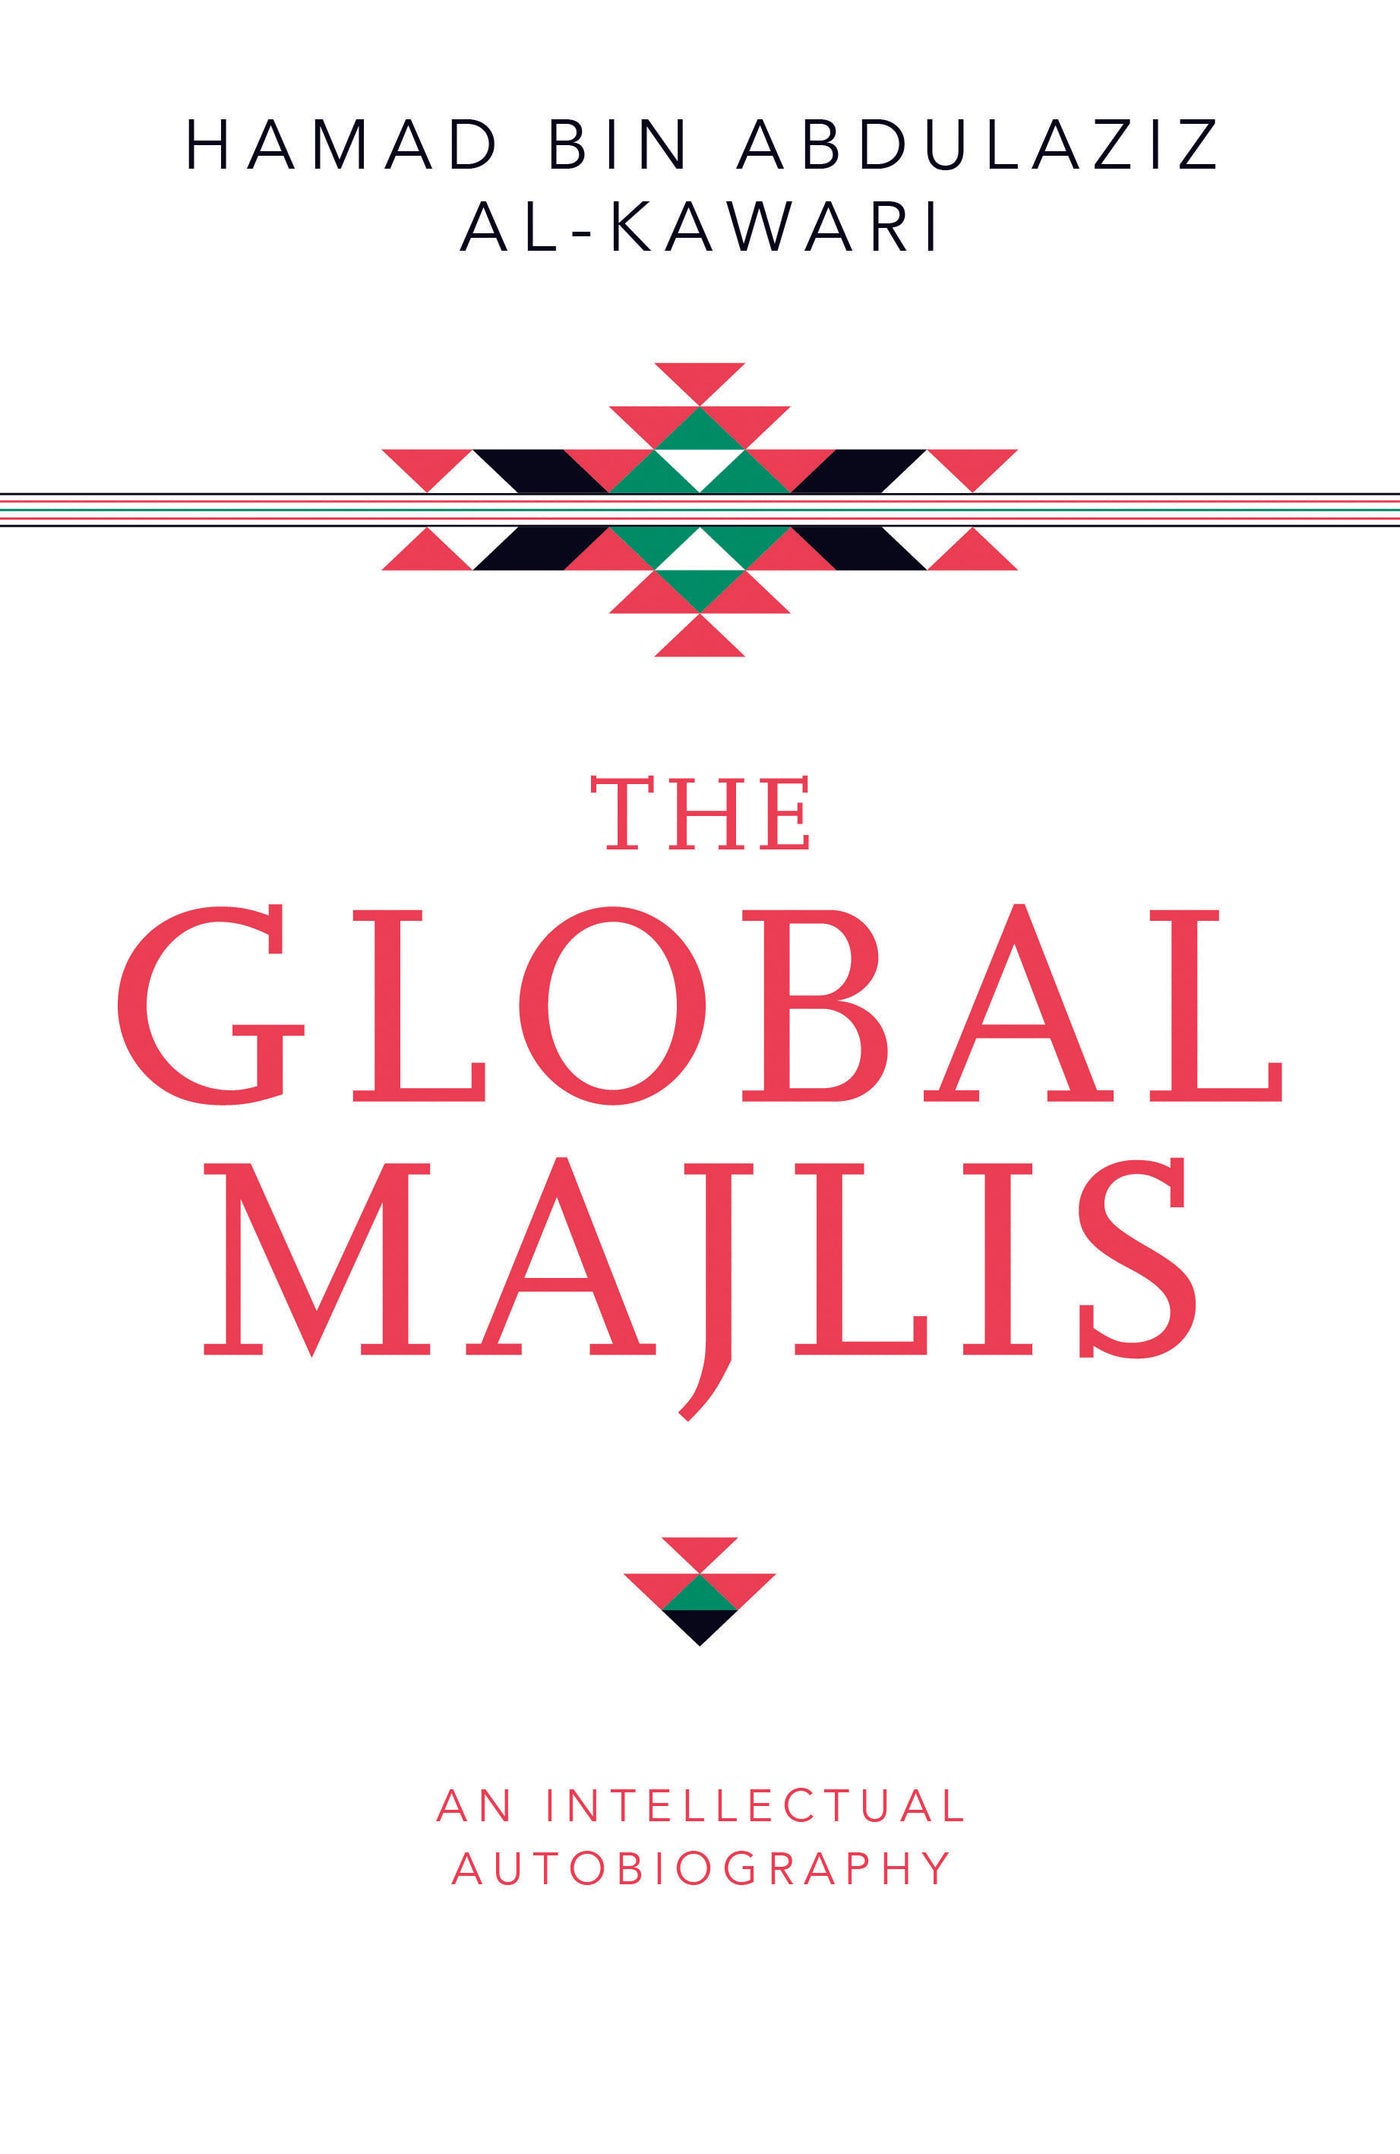 Cover of "The Global Majlis" Book